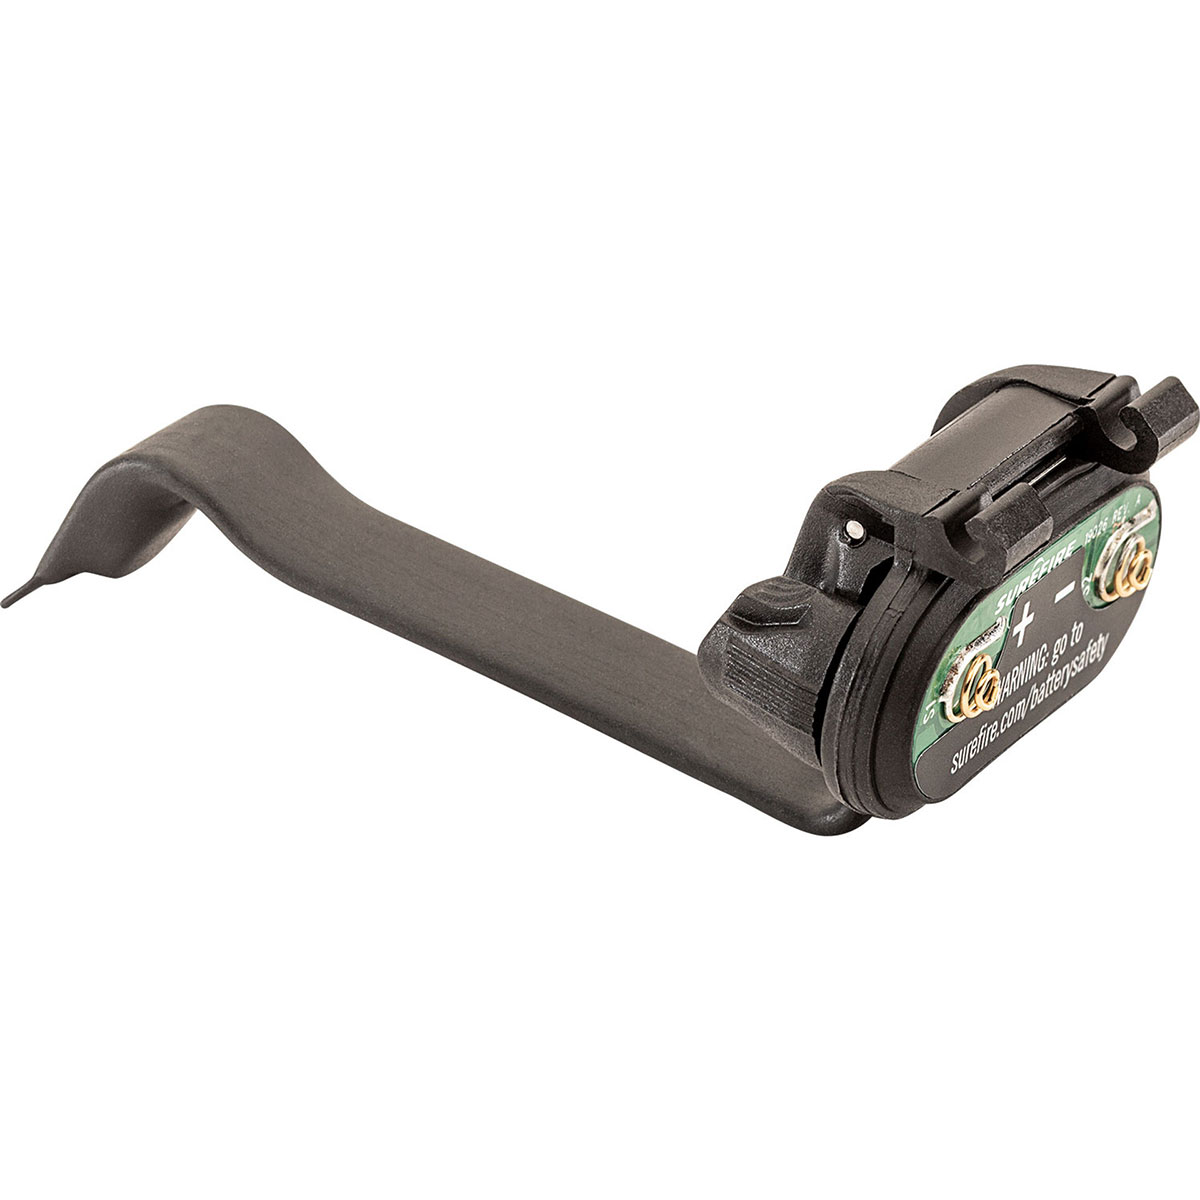 SUREFIRE DG-20 SWITCH Grip Switch Assembly for X-Series